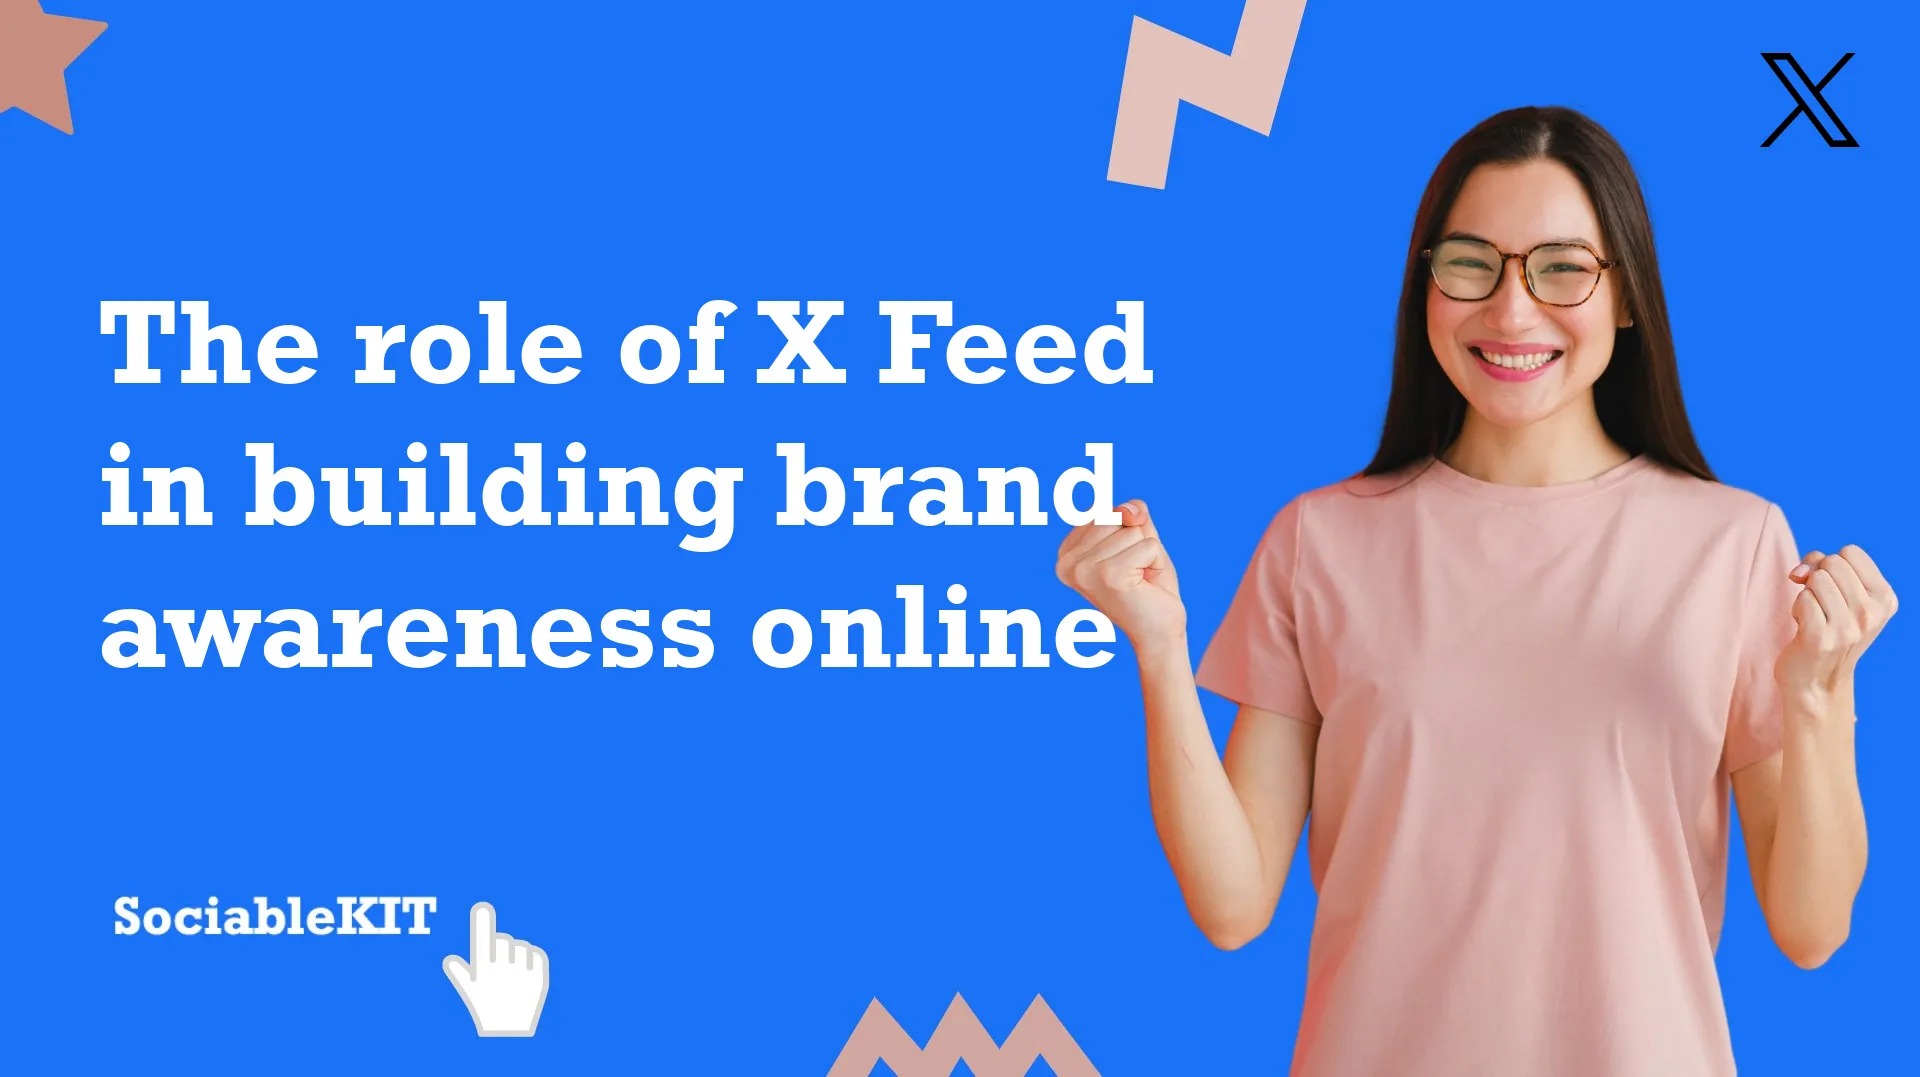 The role of X Feed in building brand awareness online